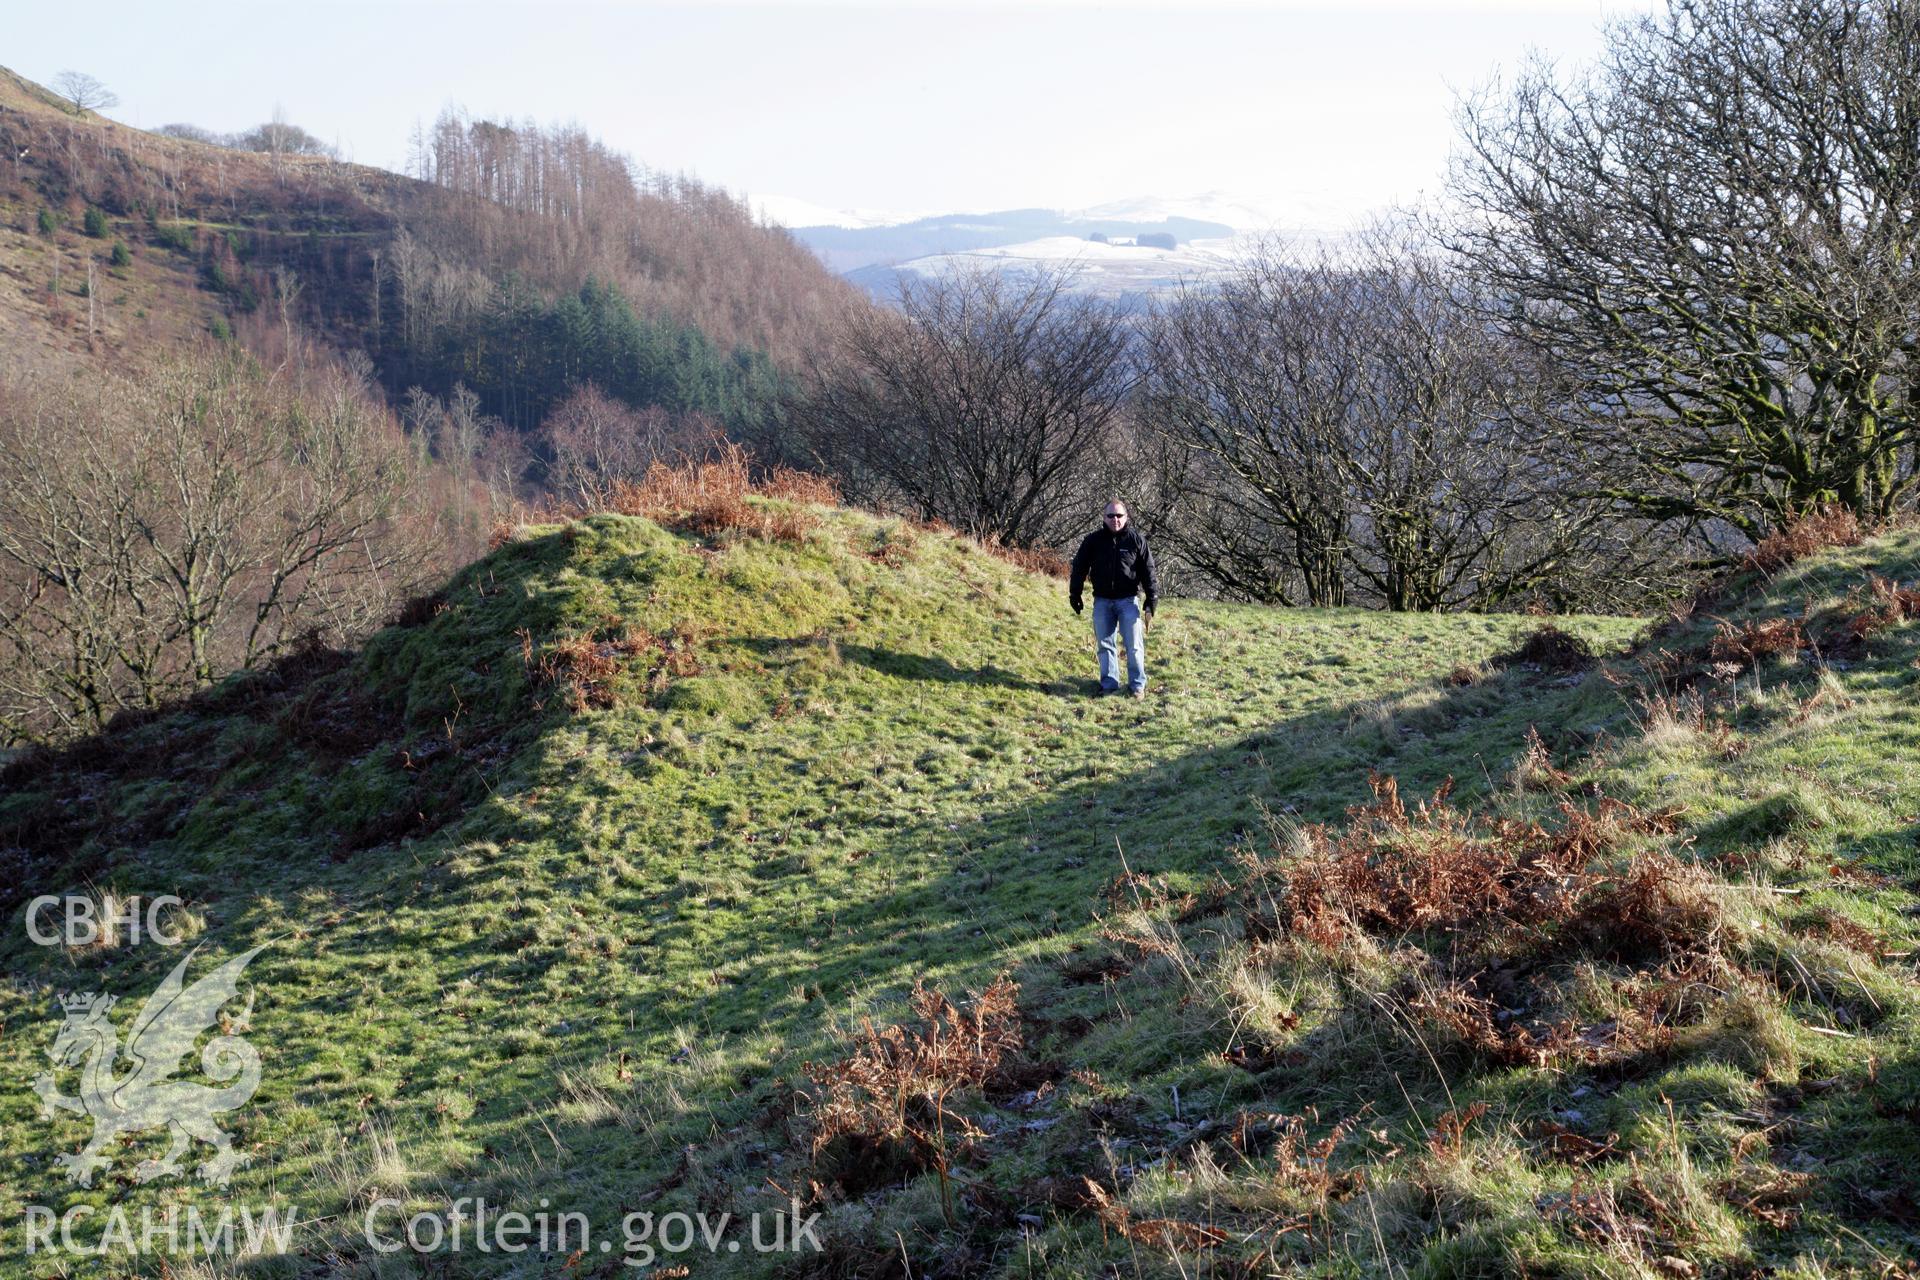 Castell Grogwynion hillfort, Royal Commission survey 2012, view of north-east gateway bastion with figure for scale